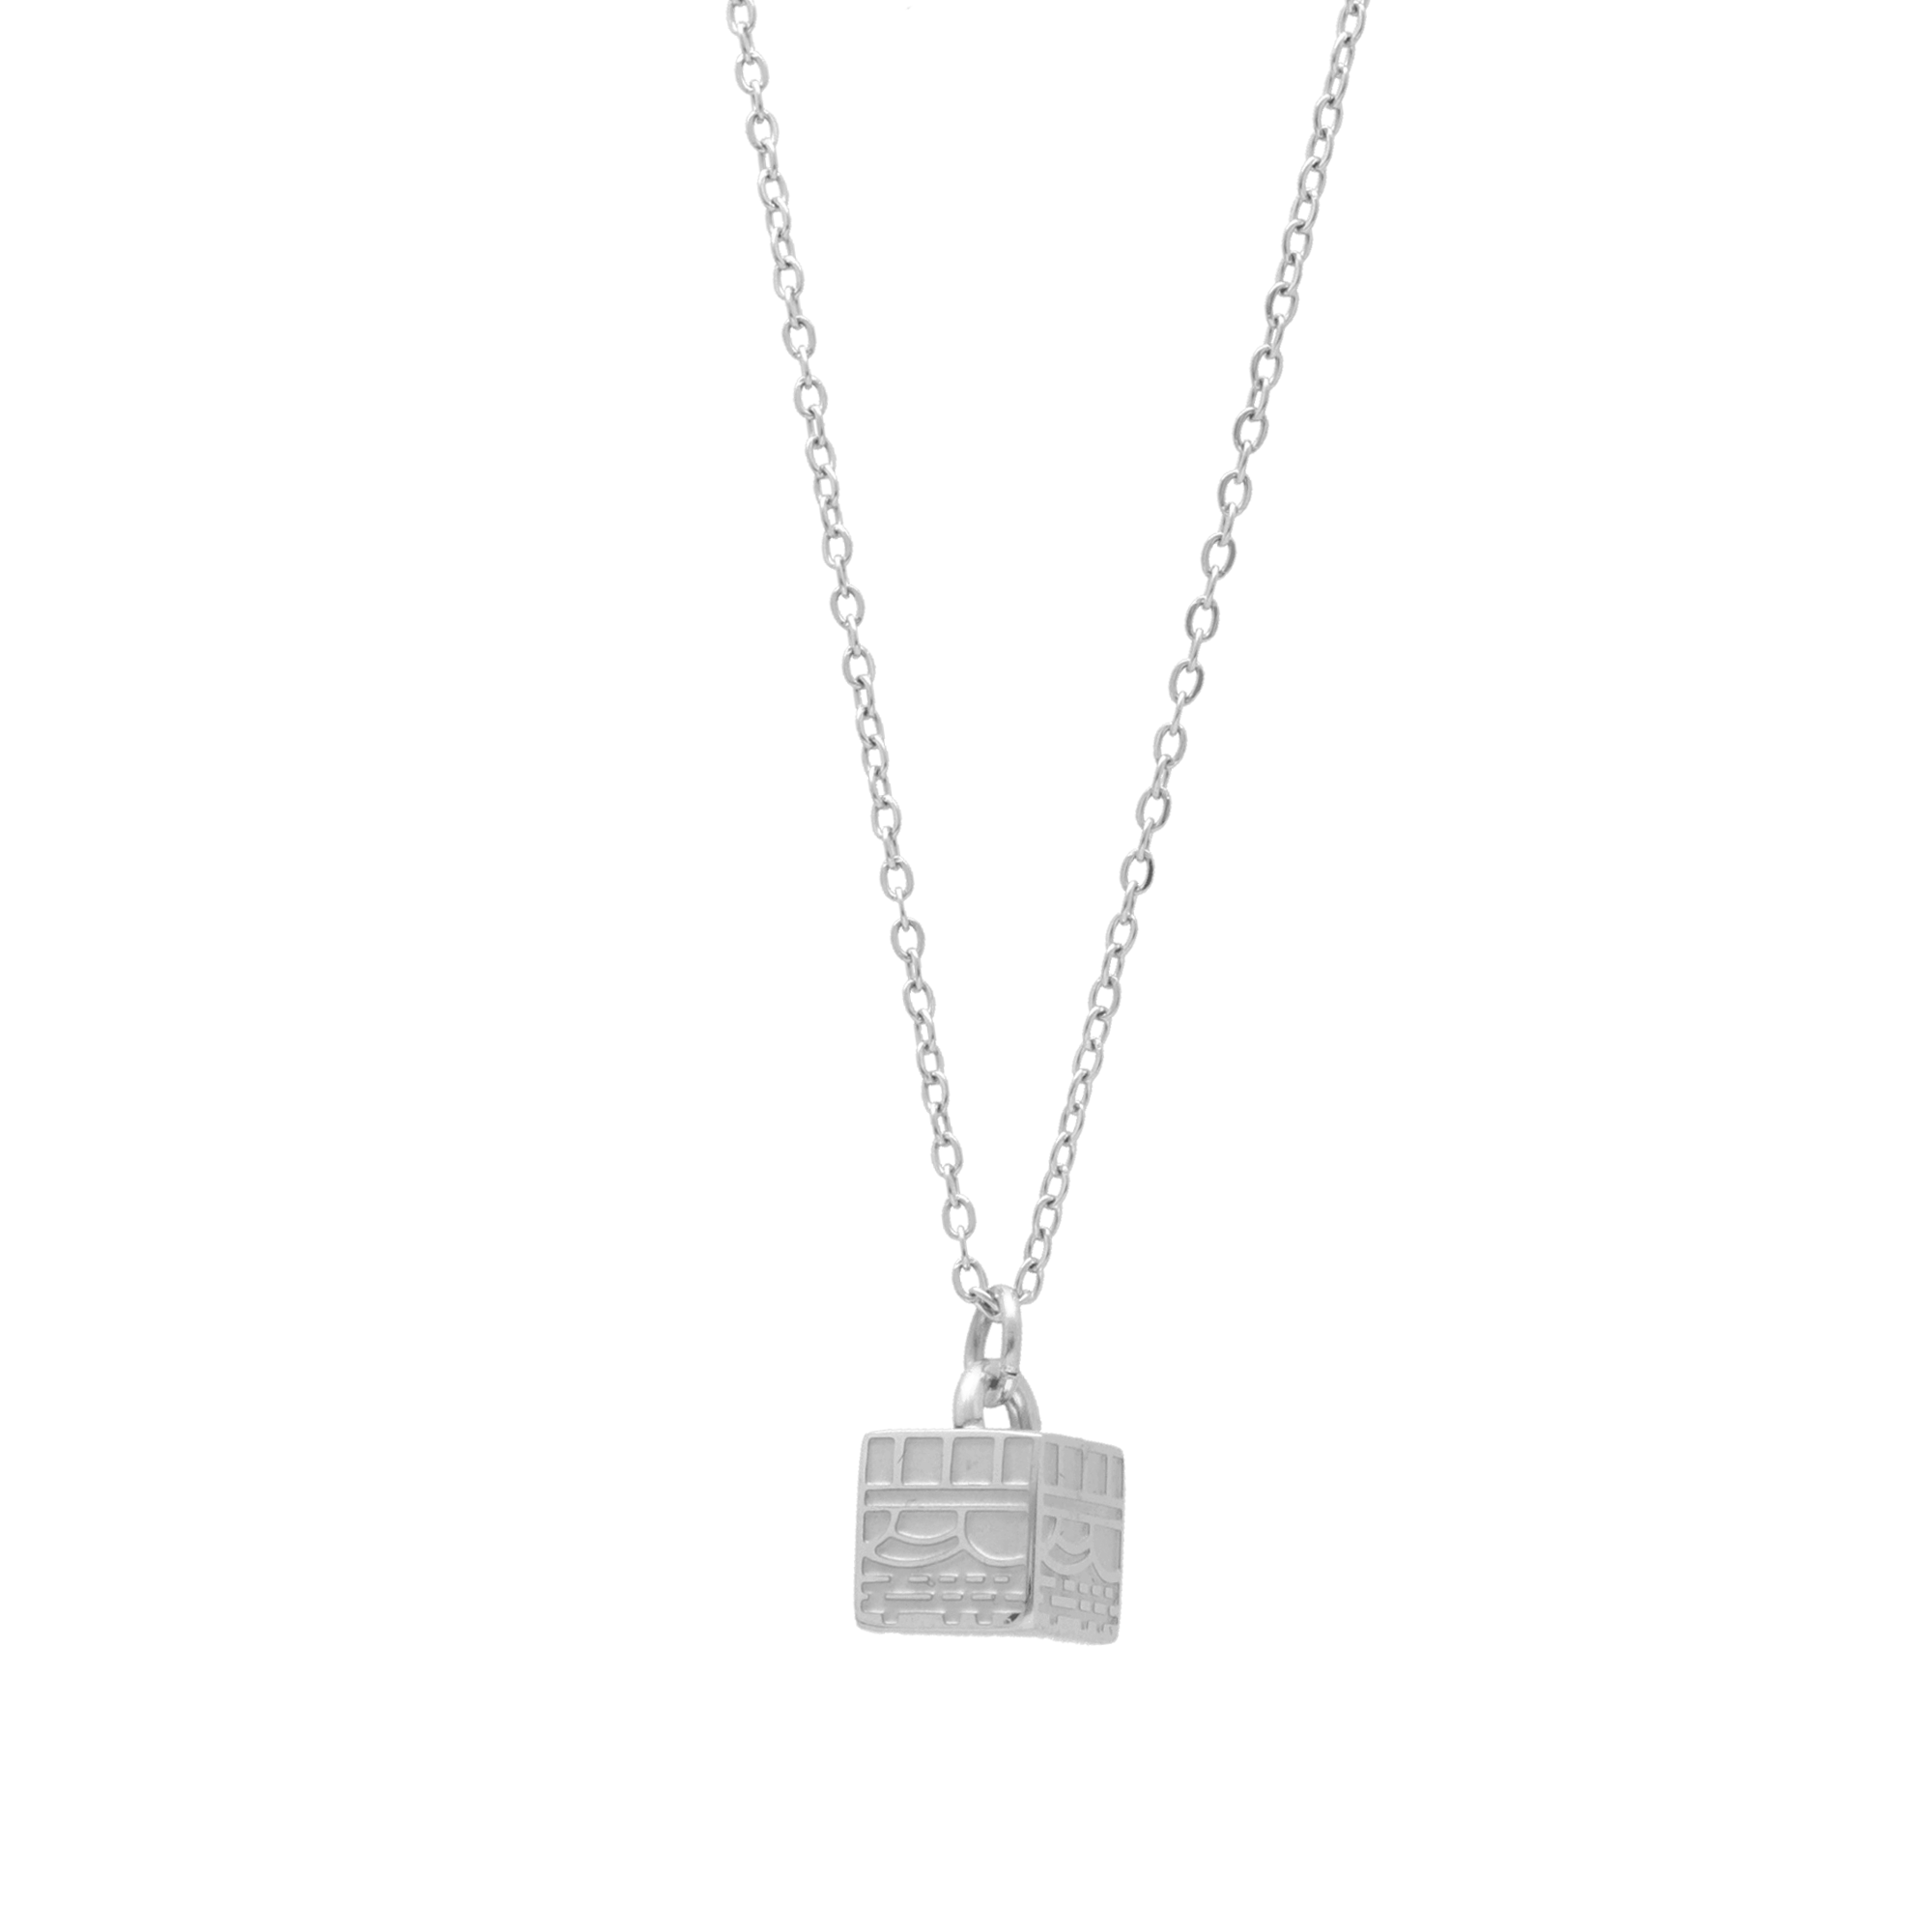 Kaaba Necklace